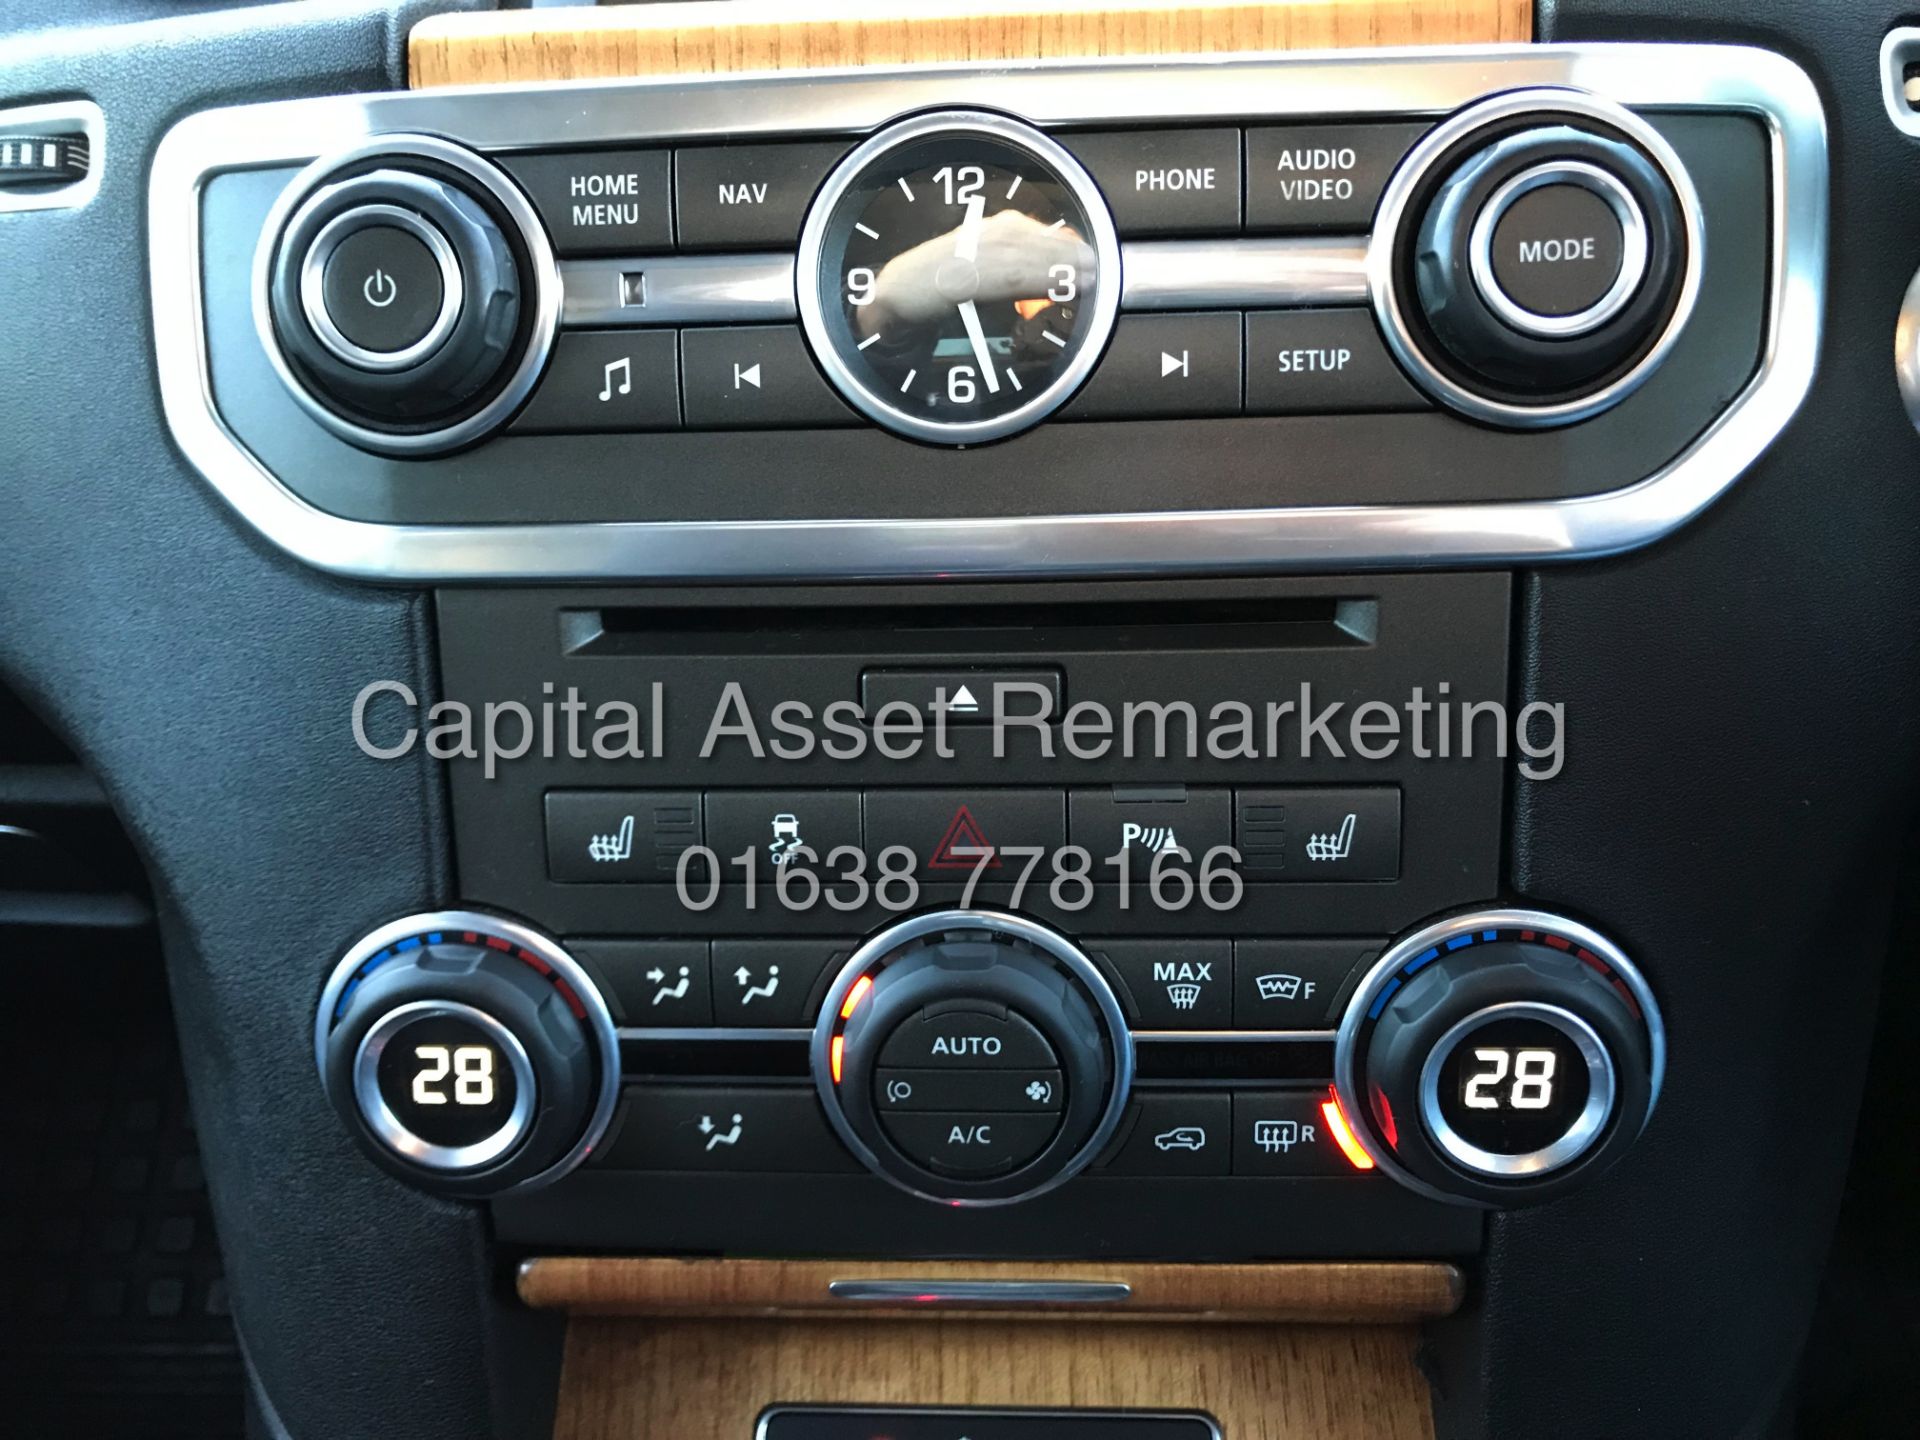 LAND ROVER DISCOVERY 4 "HSE" 3.0 SDV6 AUTOMATIC (13 REG) 7 SEATER **TOP OF THE RANGE** FULLY LOADED - Image 17 of 31